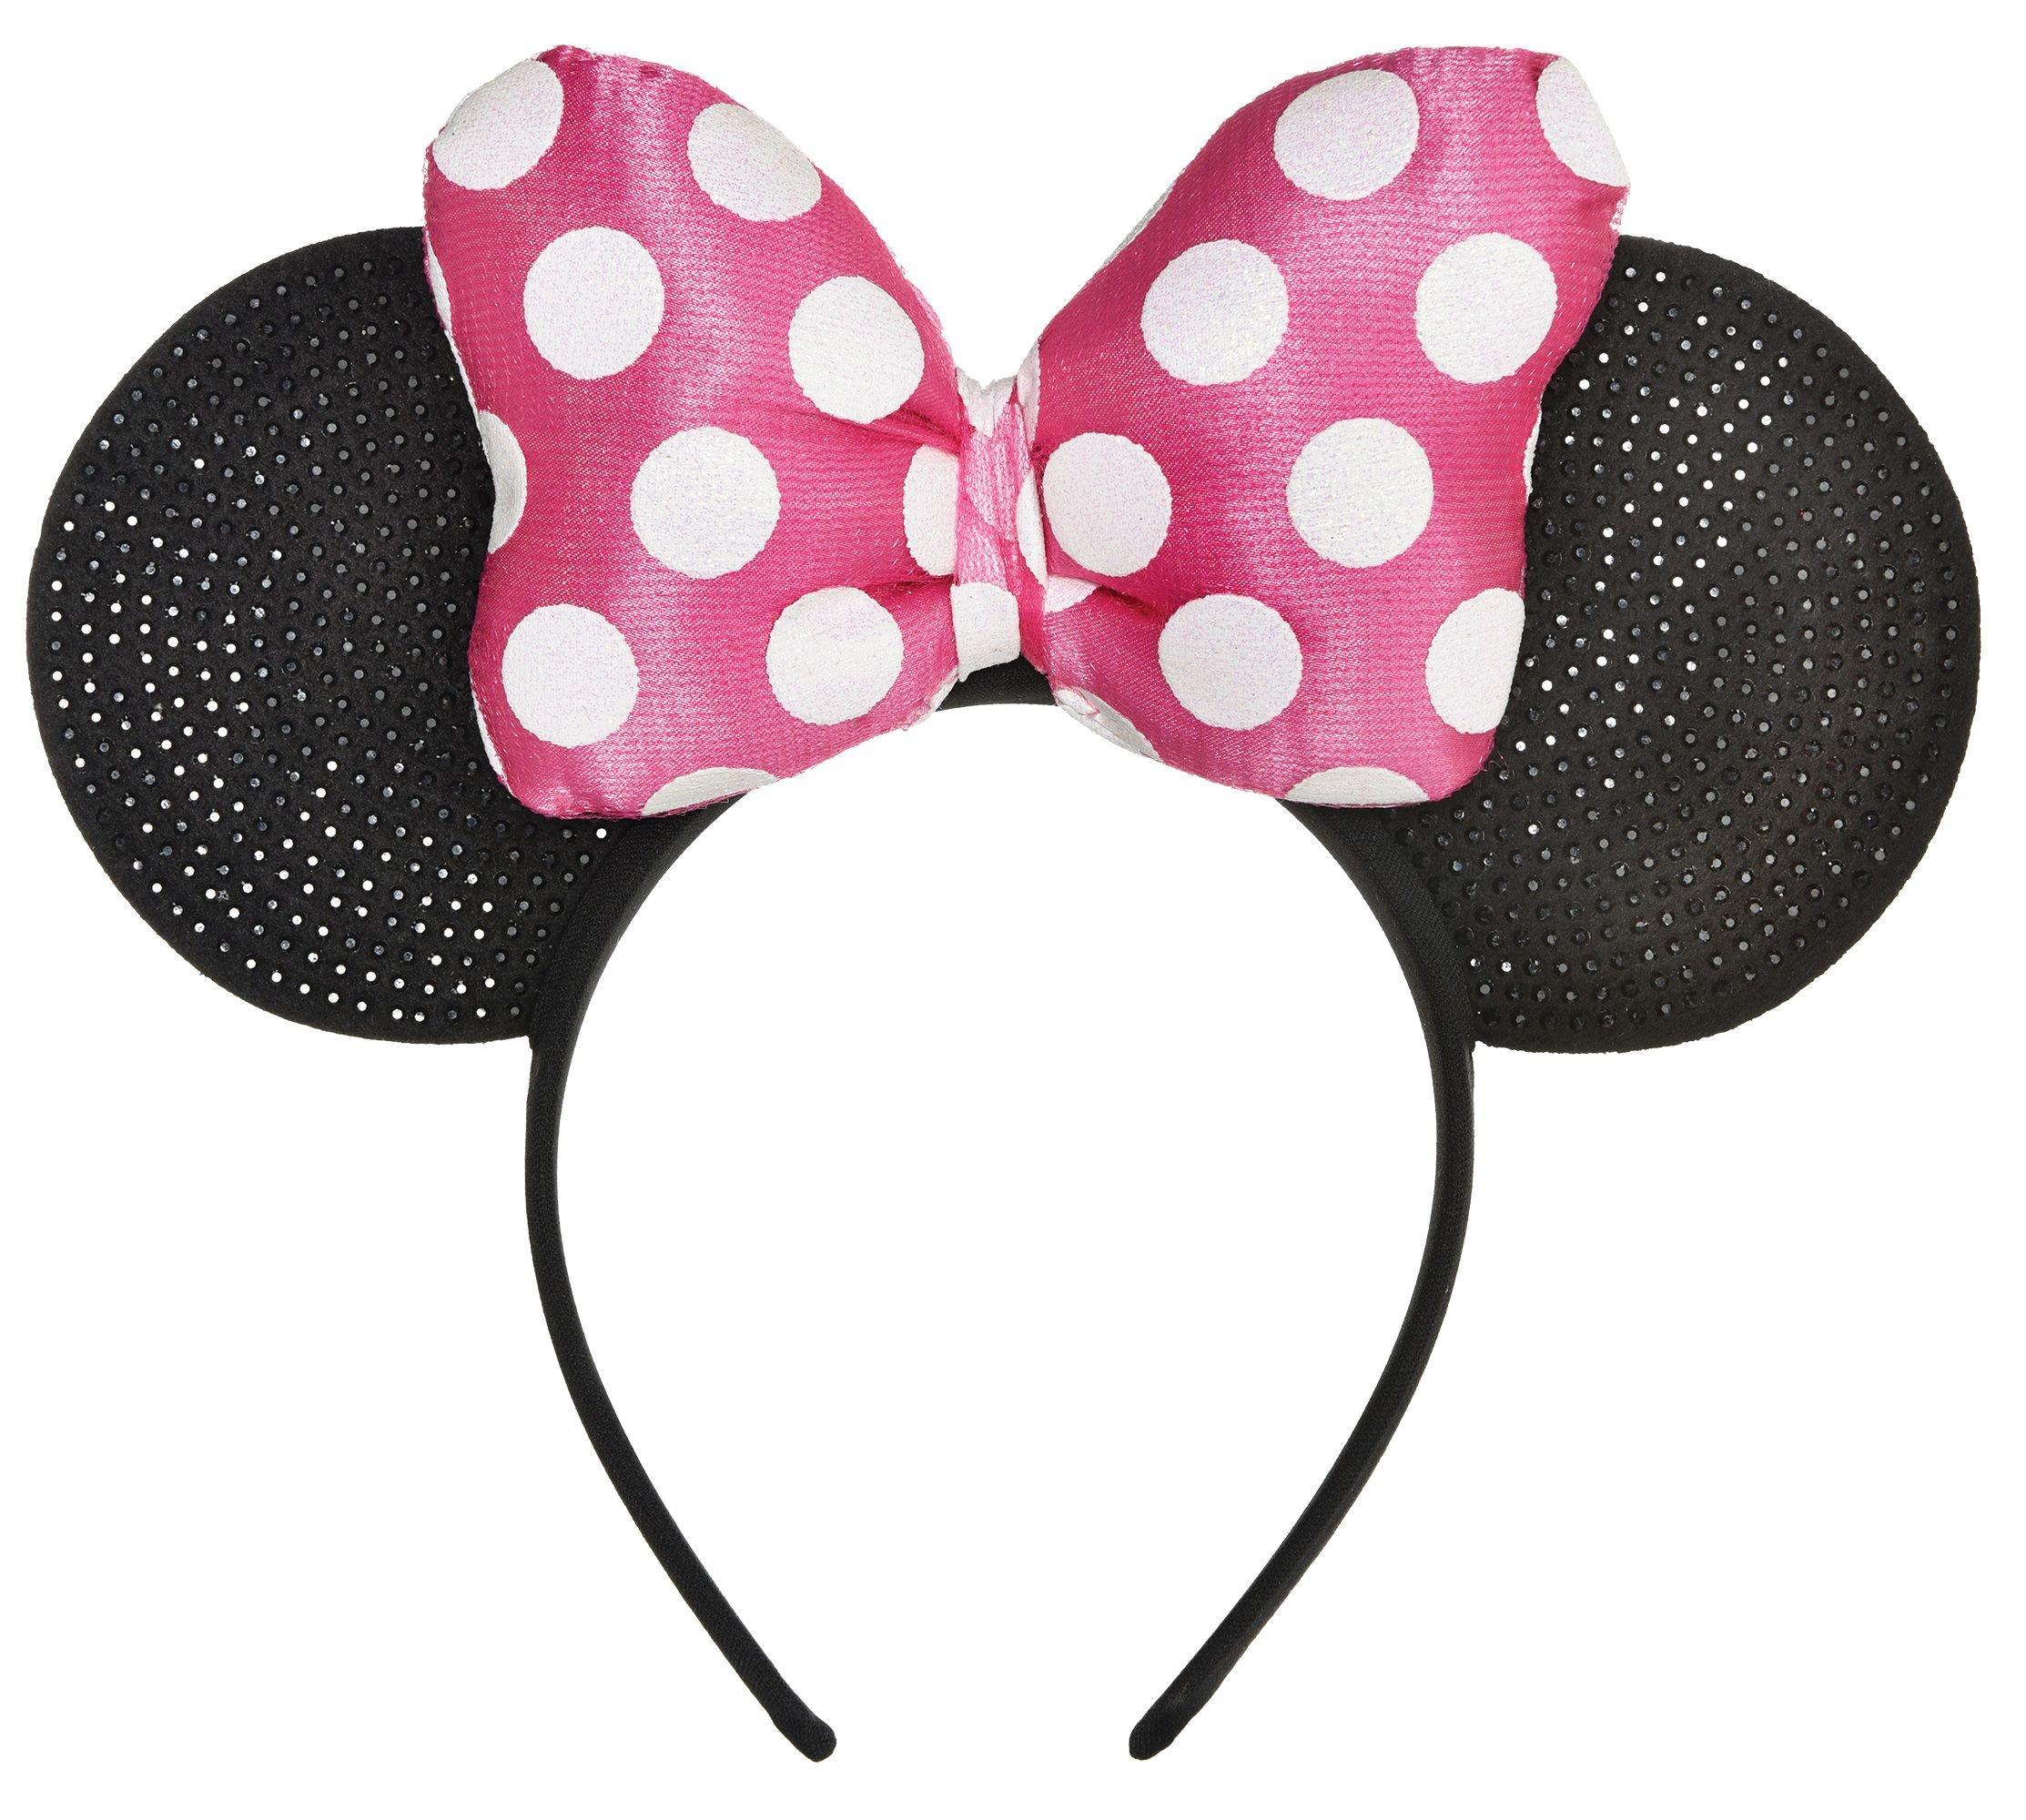 Minnie Mouse Forever Headband